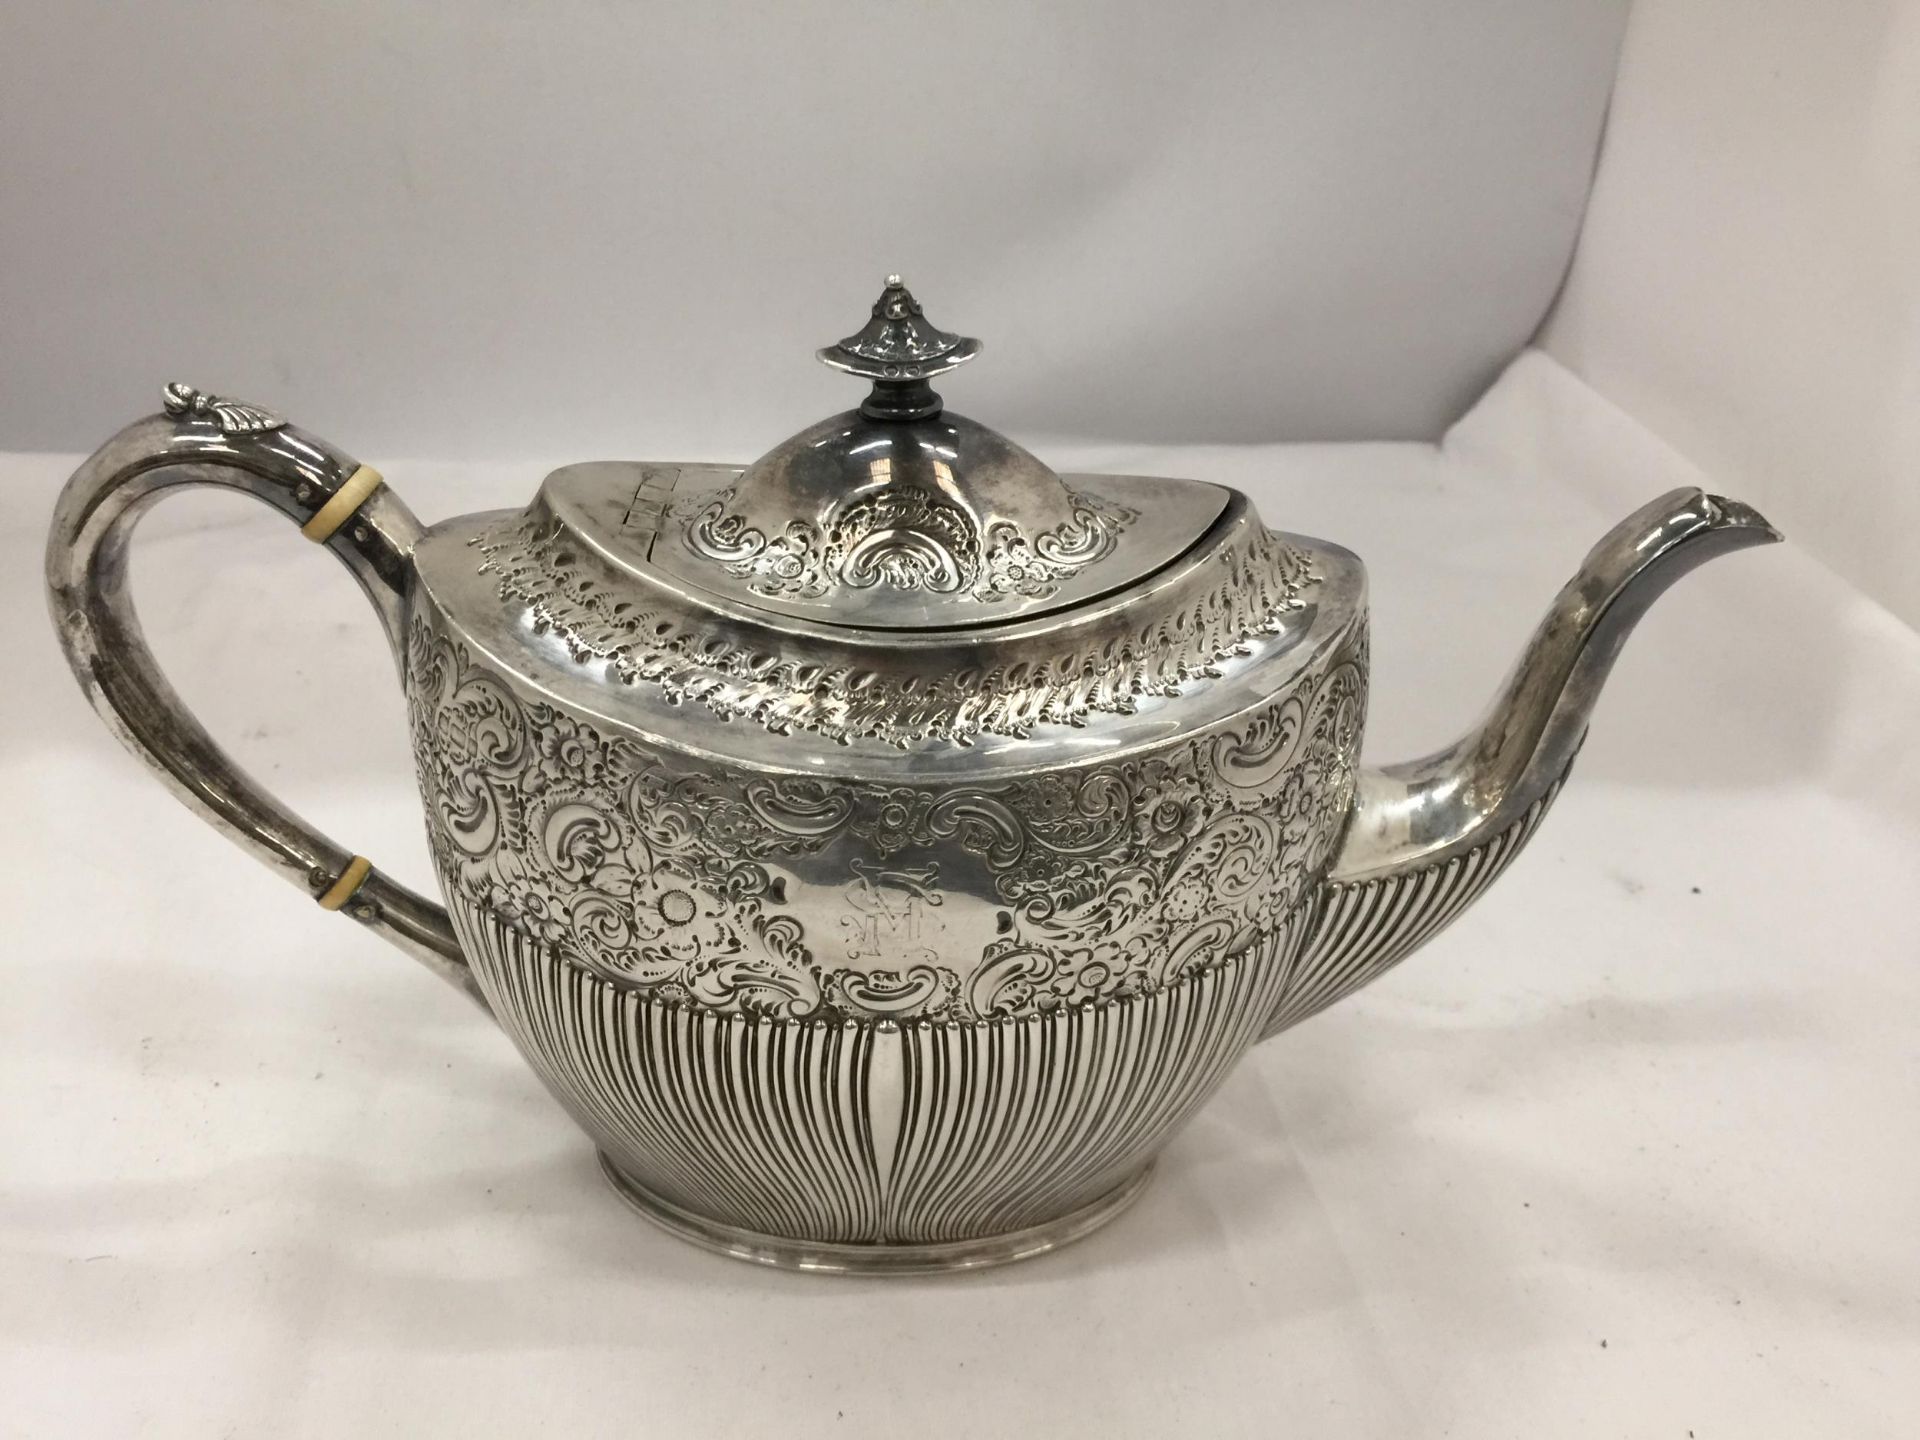 AN EDWARD VII 1902 SILVER TEAPOT WITH CHASED AND ENGRAVED FLORAL DESIGN, MAKER INDISTINCT, GROSS 546 - Image 2 of 7